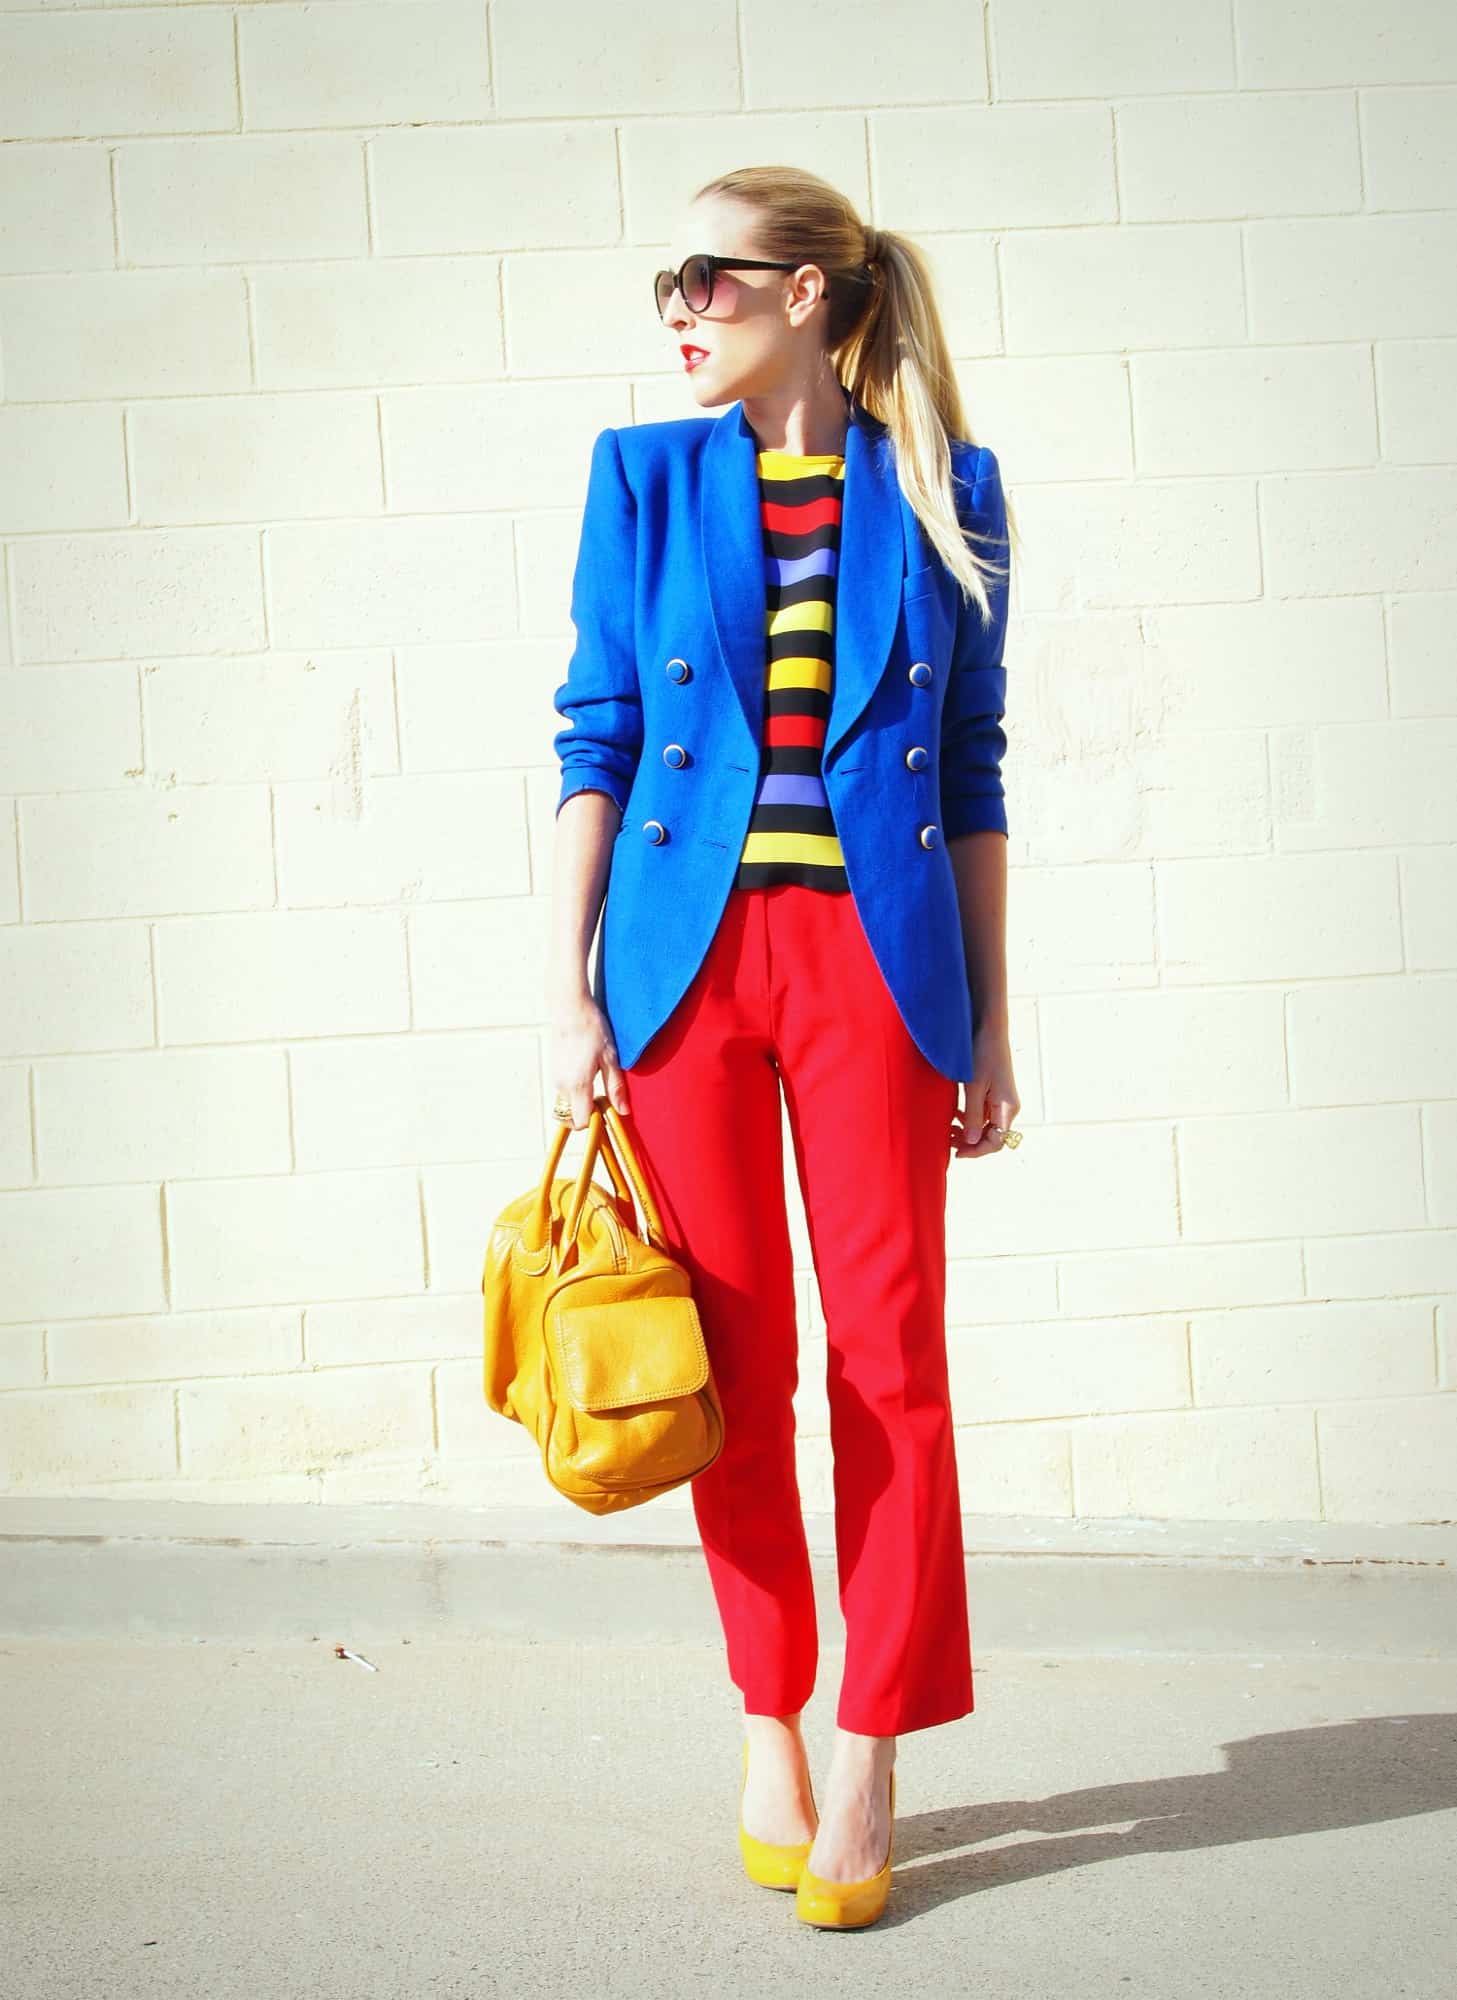 Primary Colors outfit - Suit Who